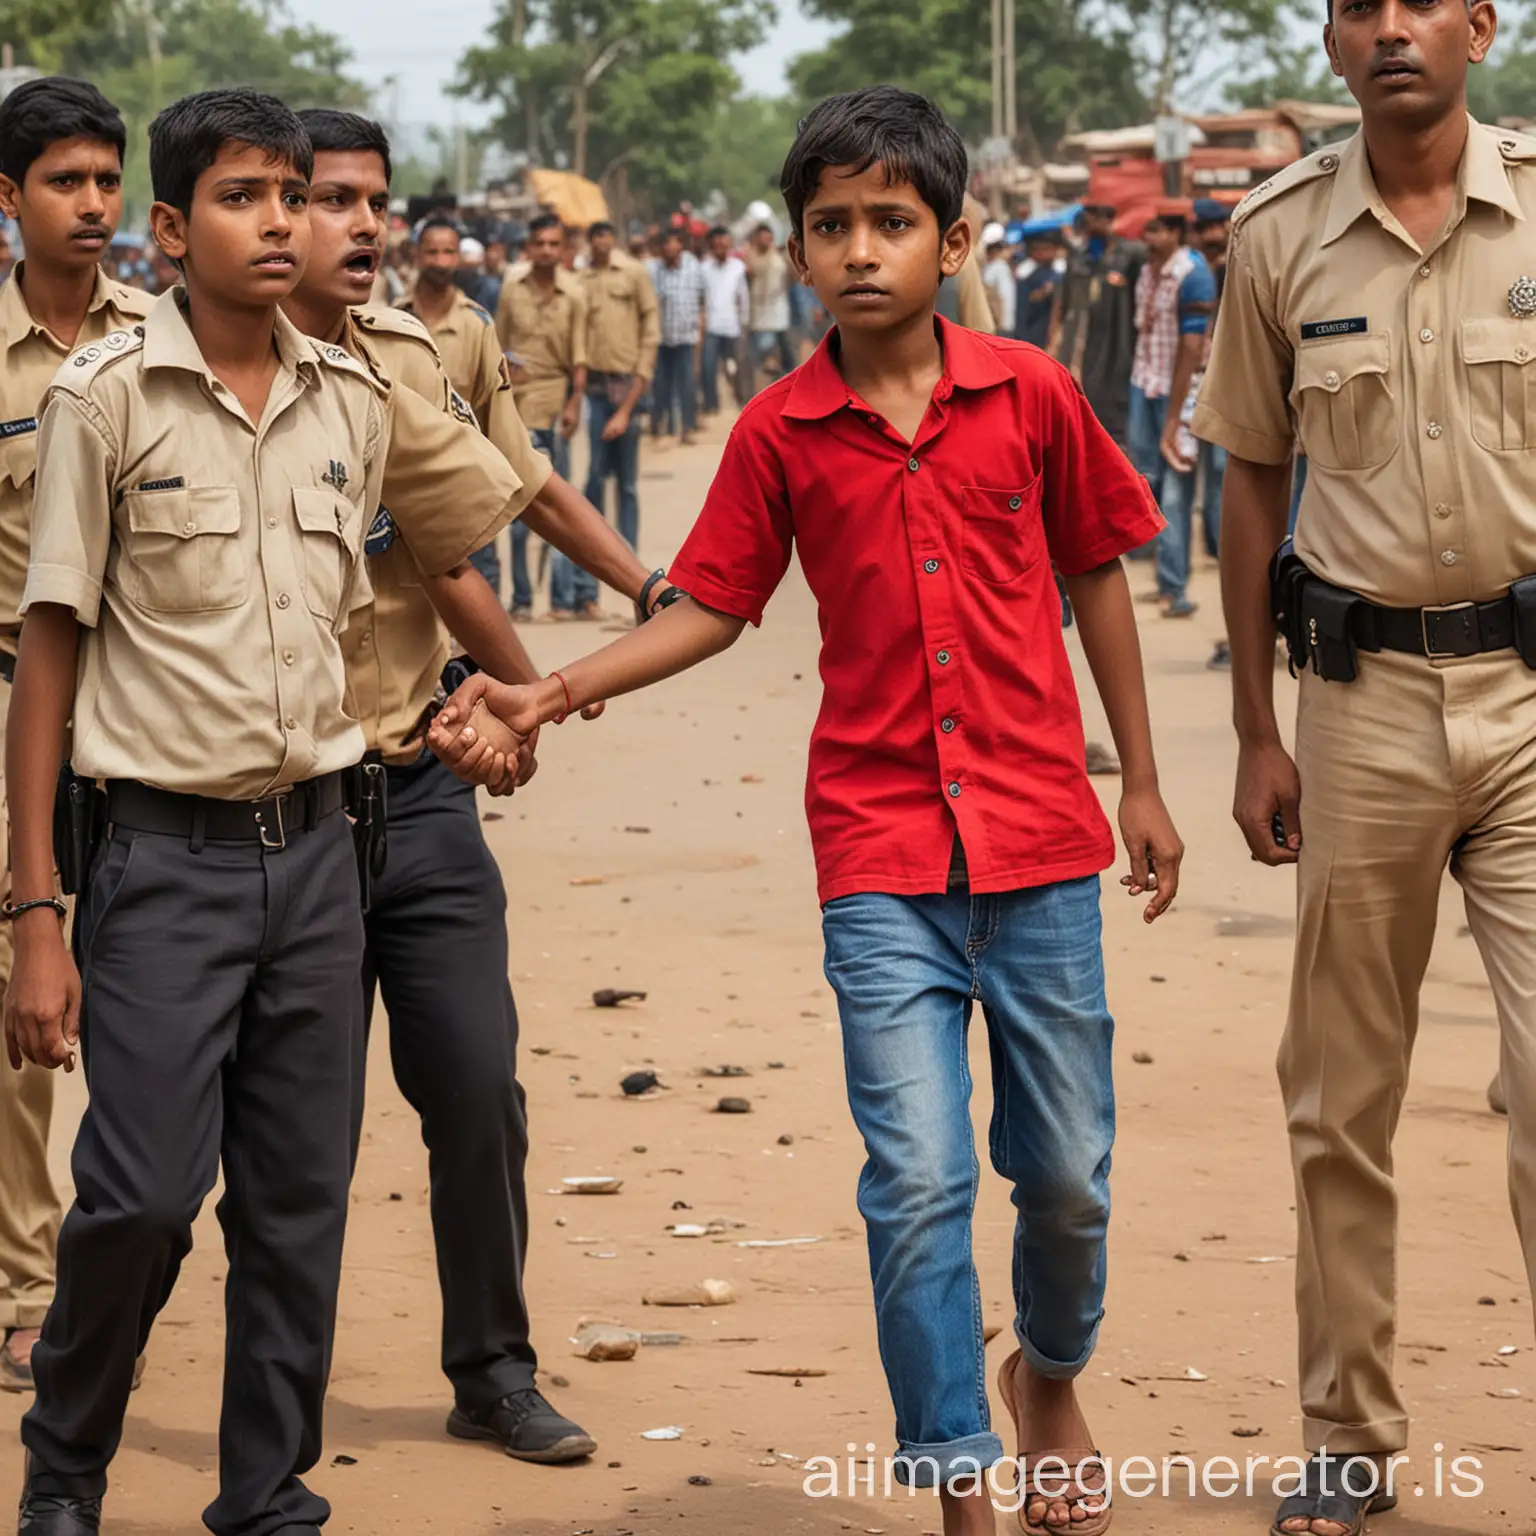 indian kid getting arrested wearing red shirt